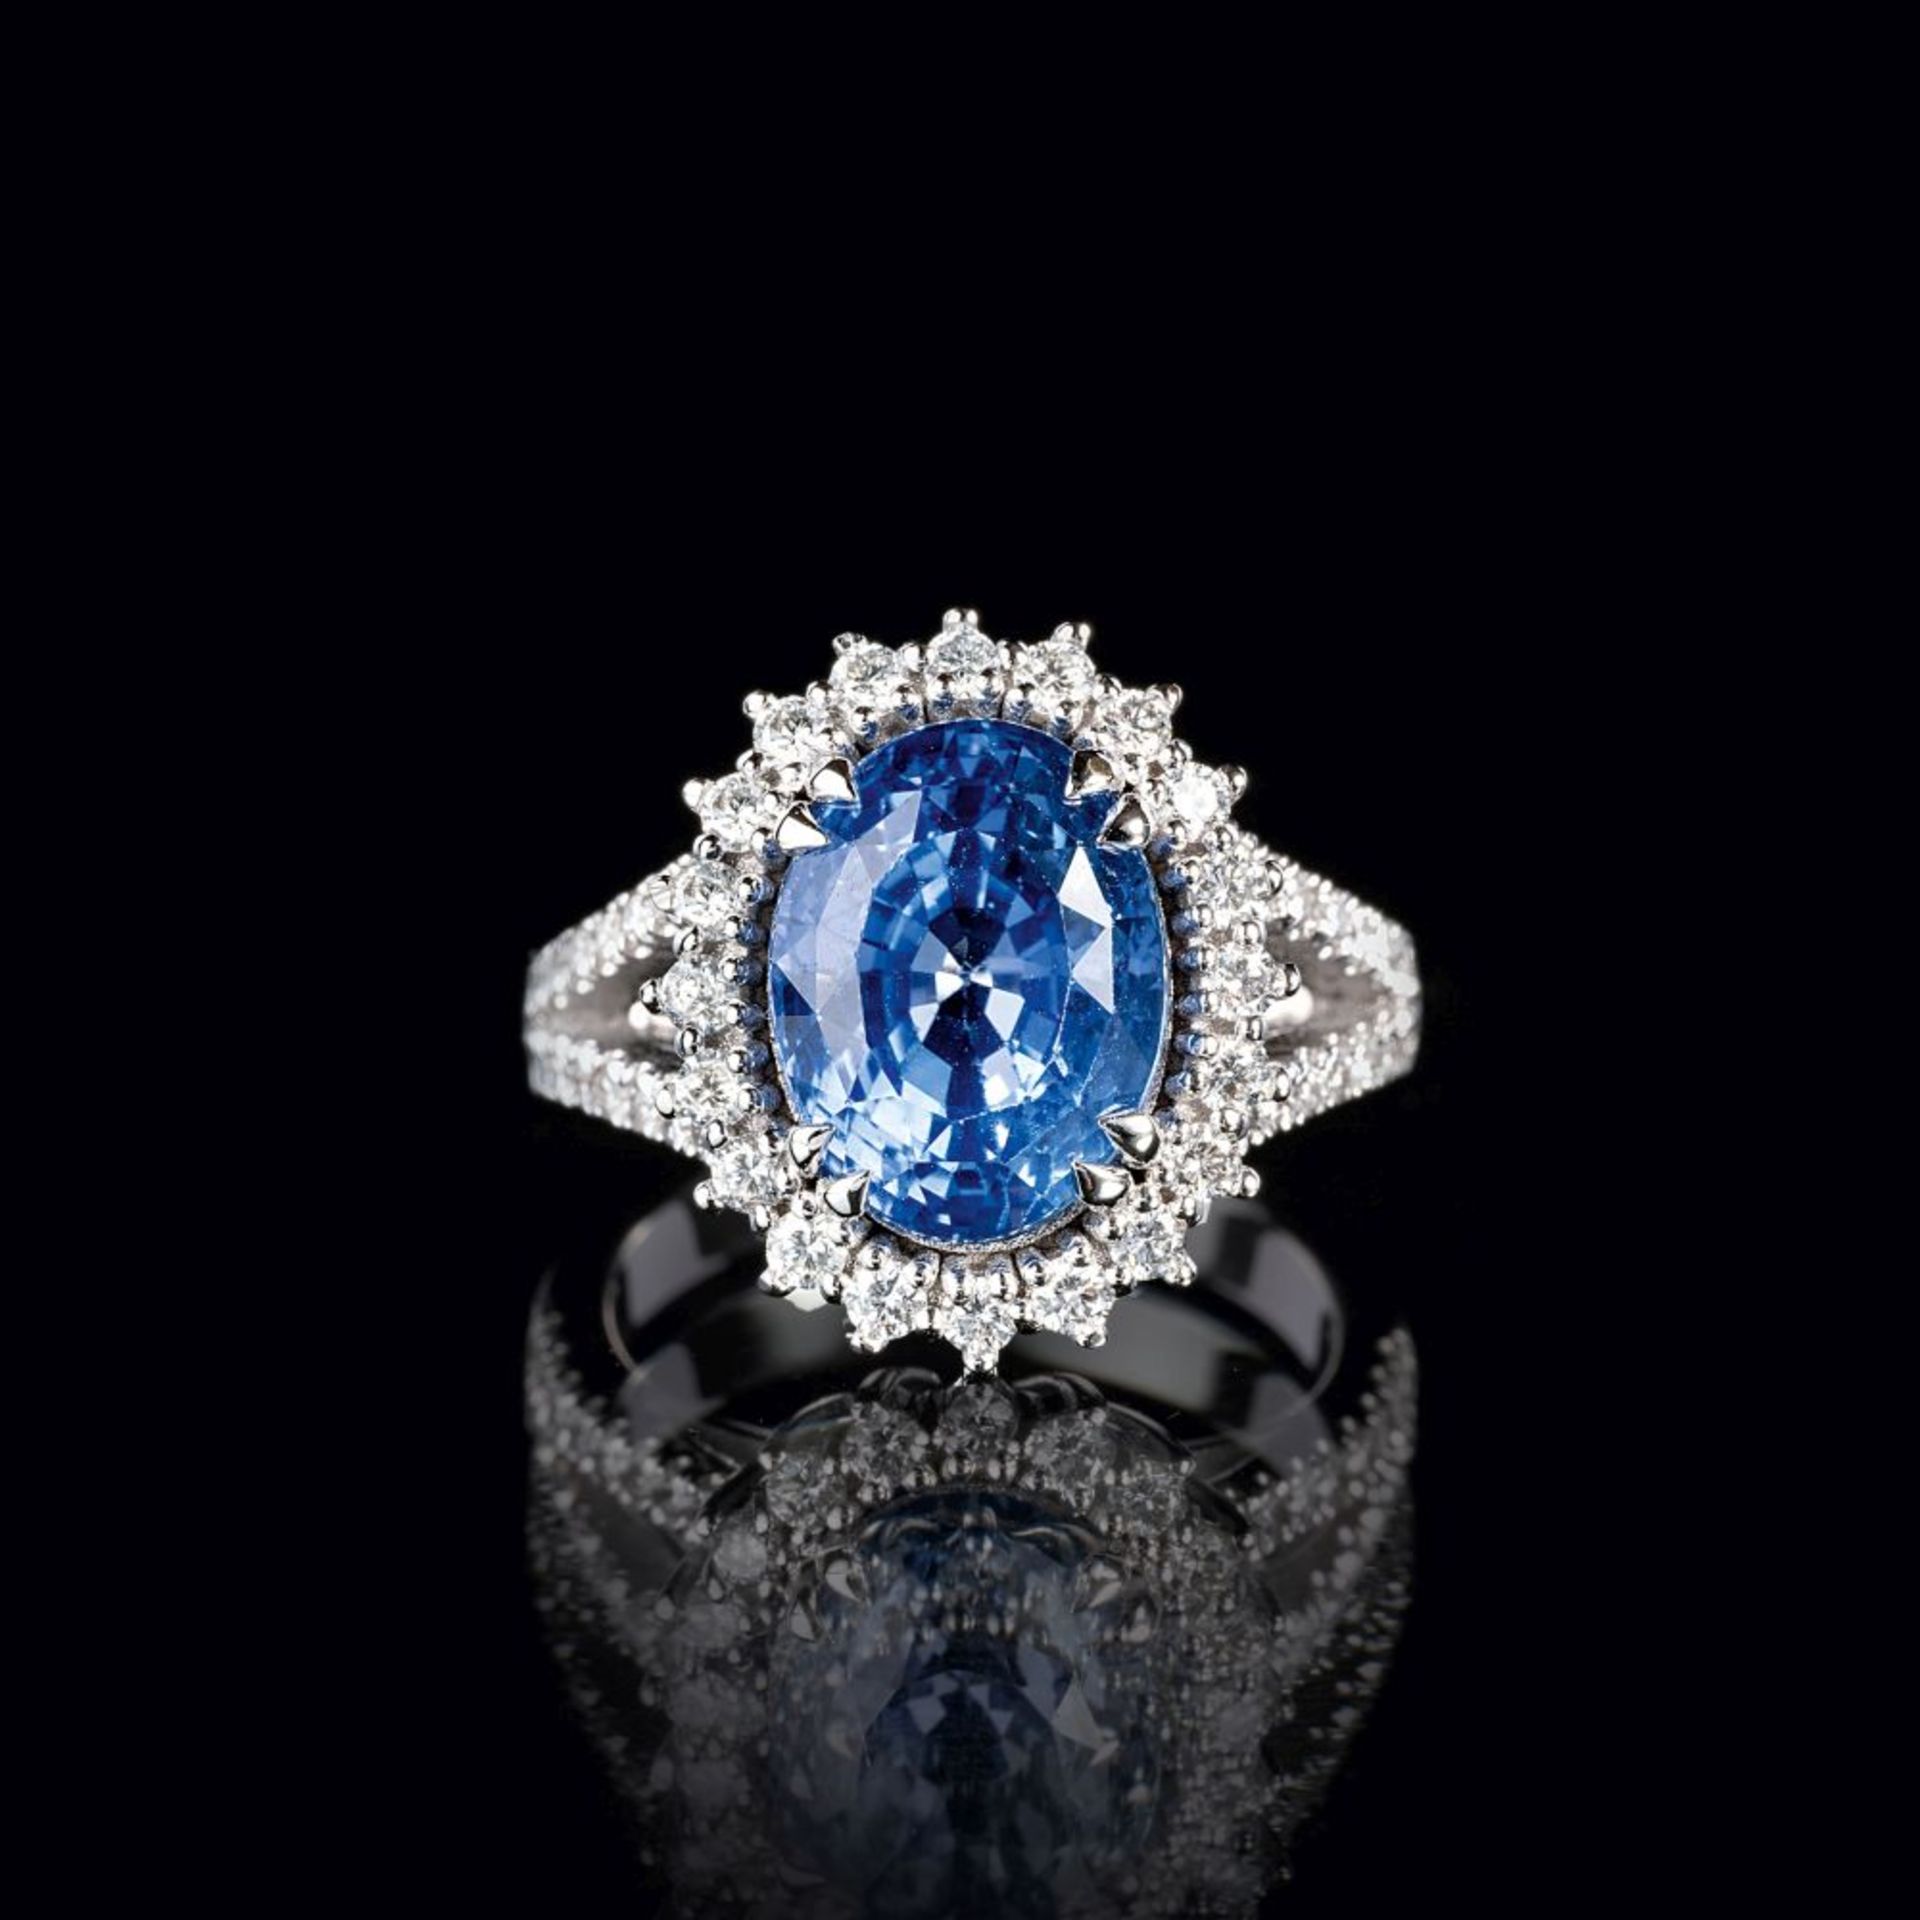 A Natural Sapphire Ring with Diamonds.